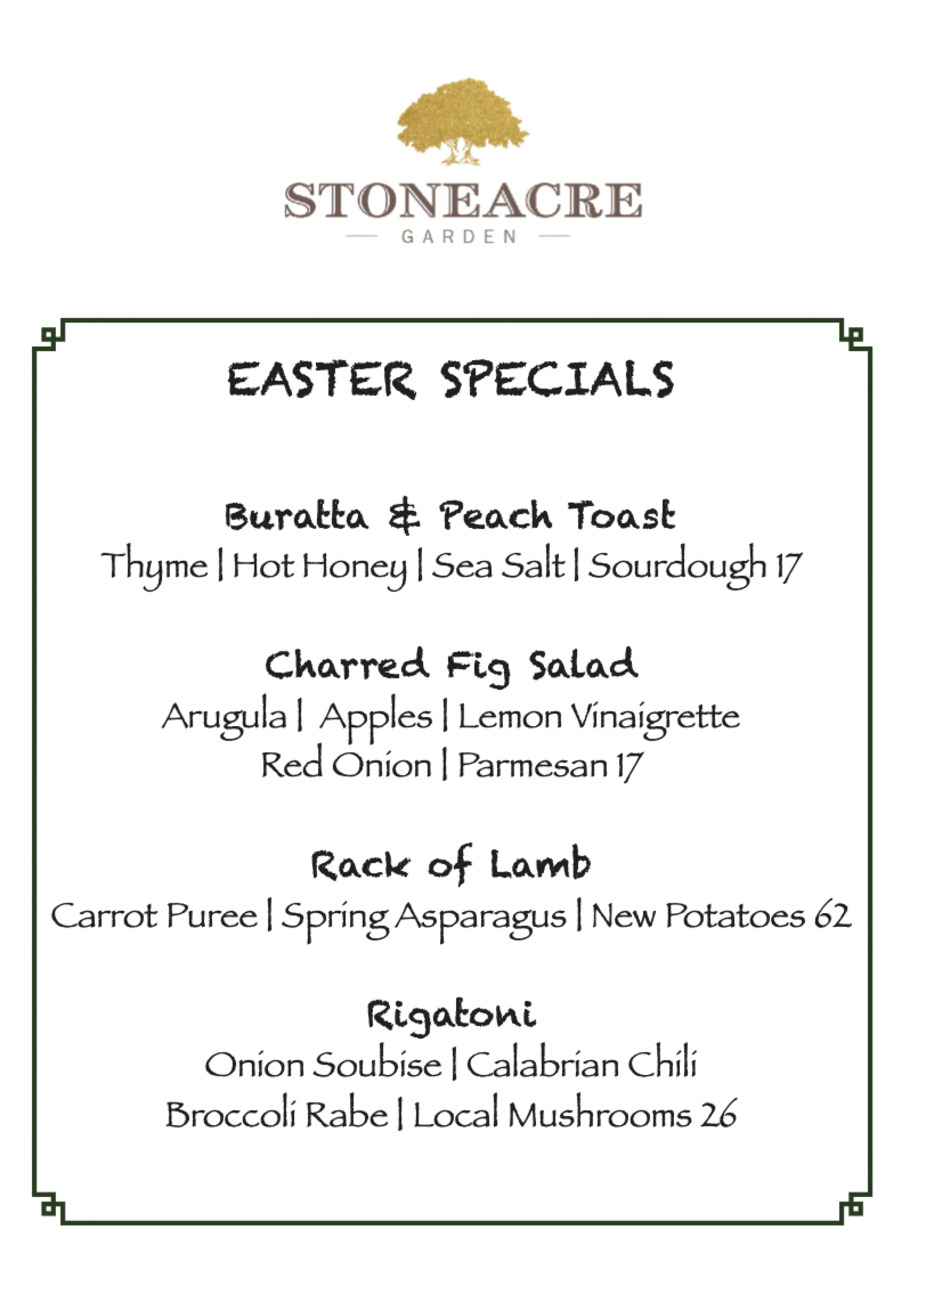 Easter Specials event photo